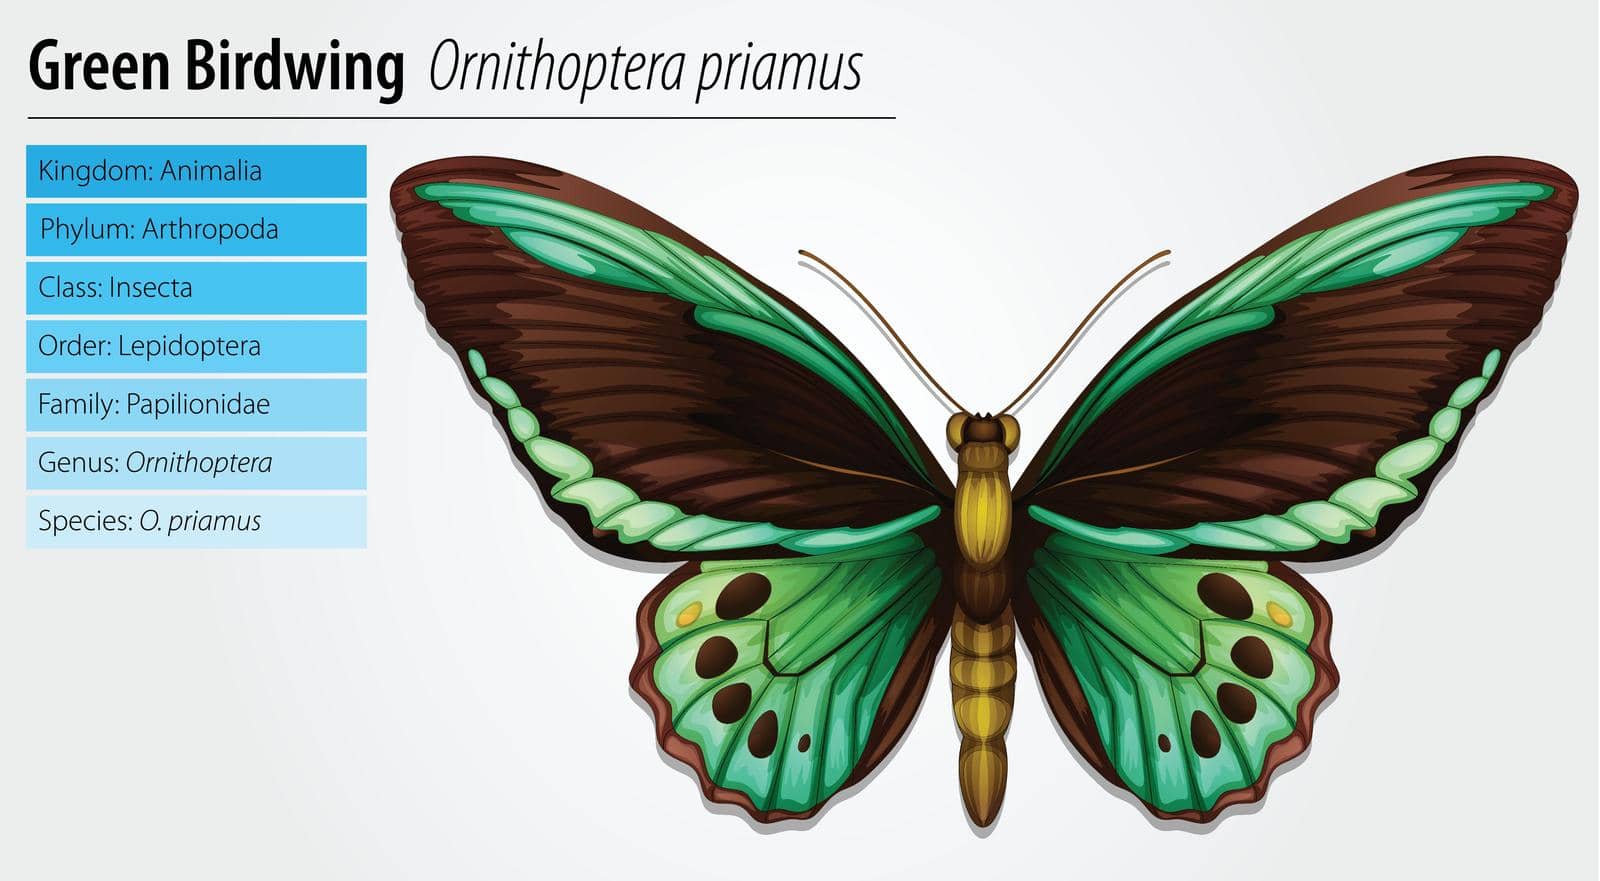 Green Birdwing butterfly - Ornithoptera primus